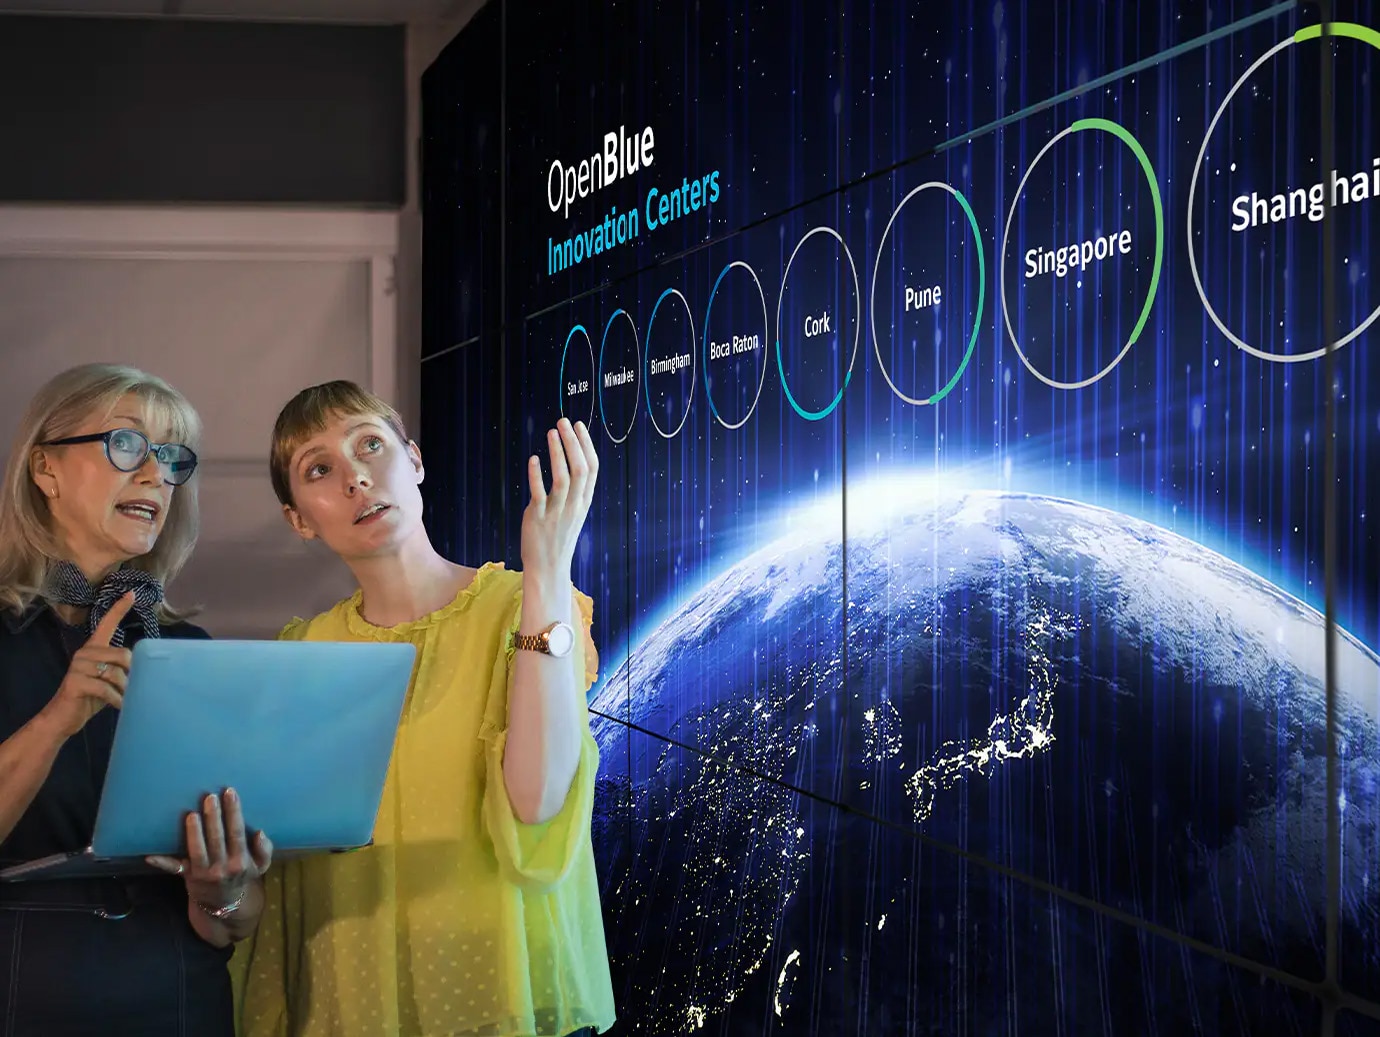 Two women discussing a presentation on OpenBlue Innovation Centers